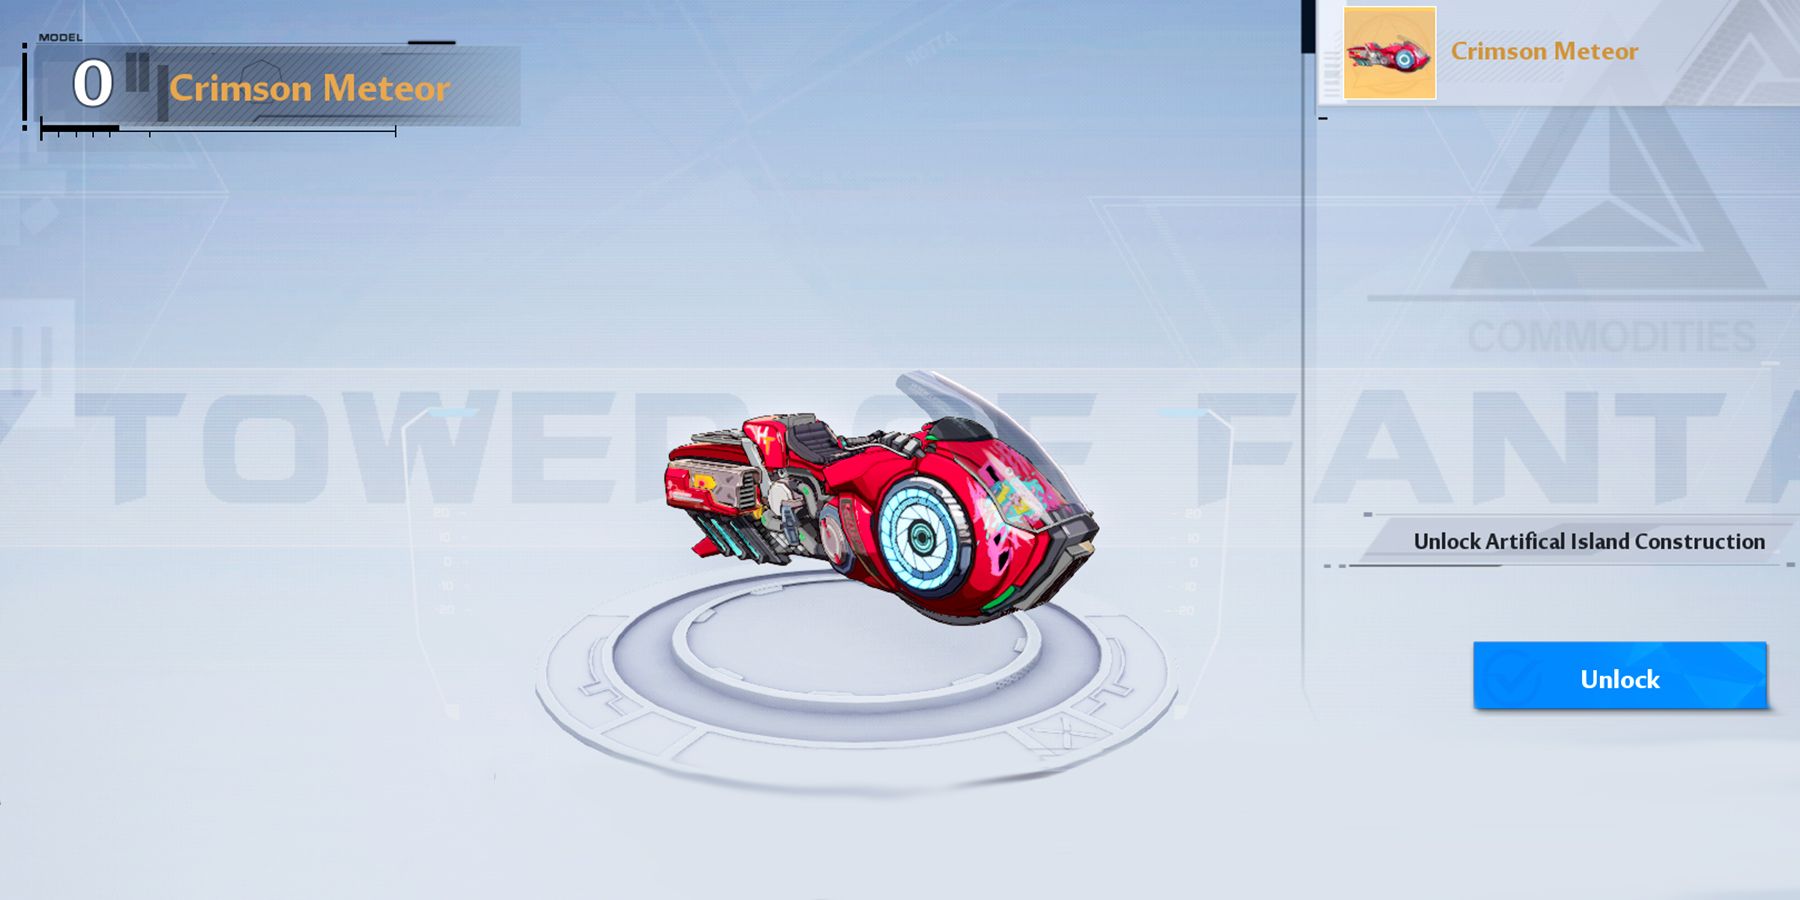 How To Unlock Crimson meteor vehicle in tower of fantasy